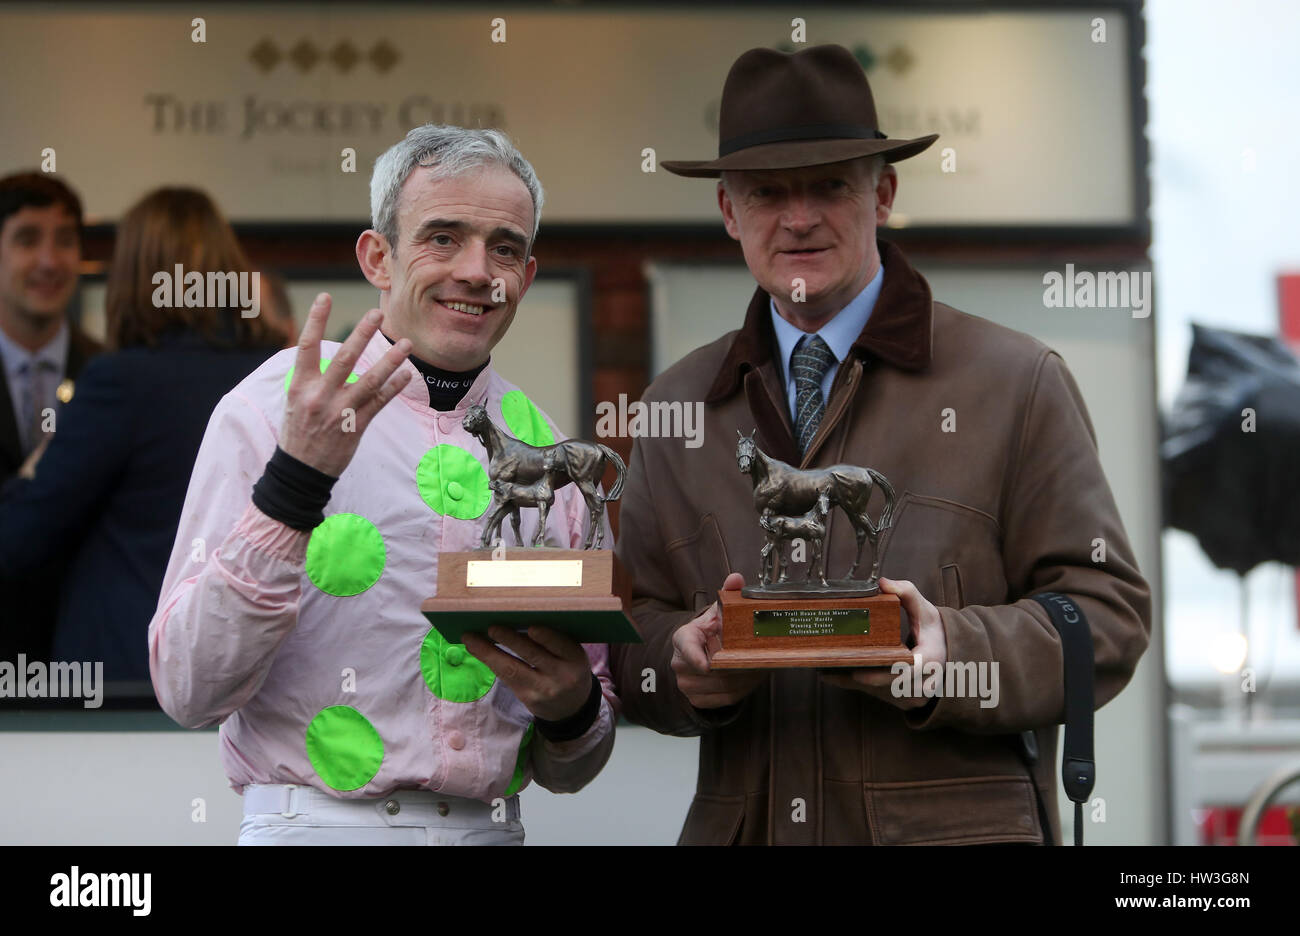 Jockey Ruby Walsh (left) and Trainer Willie Mullins (right) celebrate receiving trophies after winning the Trull House Stud Mares' Novices' Hurdle on Let's dance and achieving four wins during St Patrick's Thursday of the 2017 Cheltenham Festival at Cheltenham Racecourse. Stock Photo